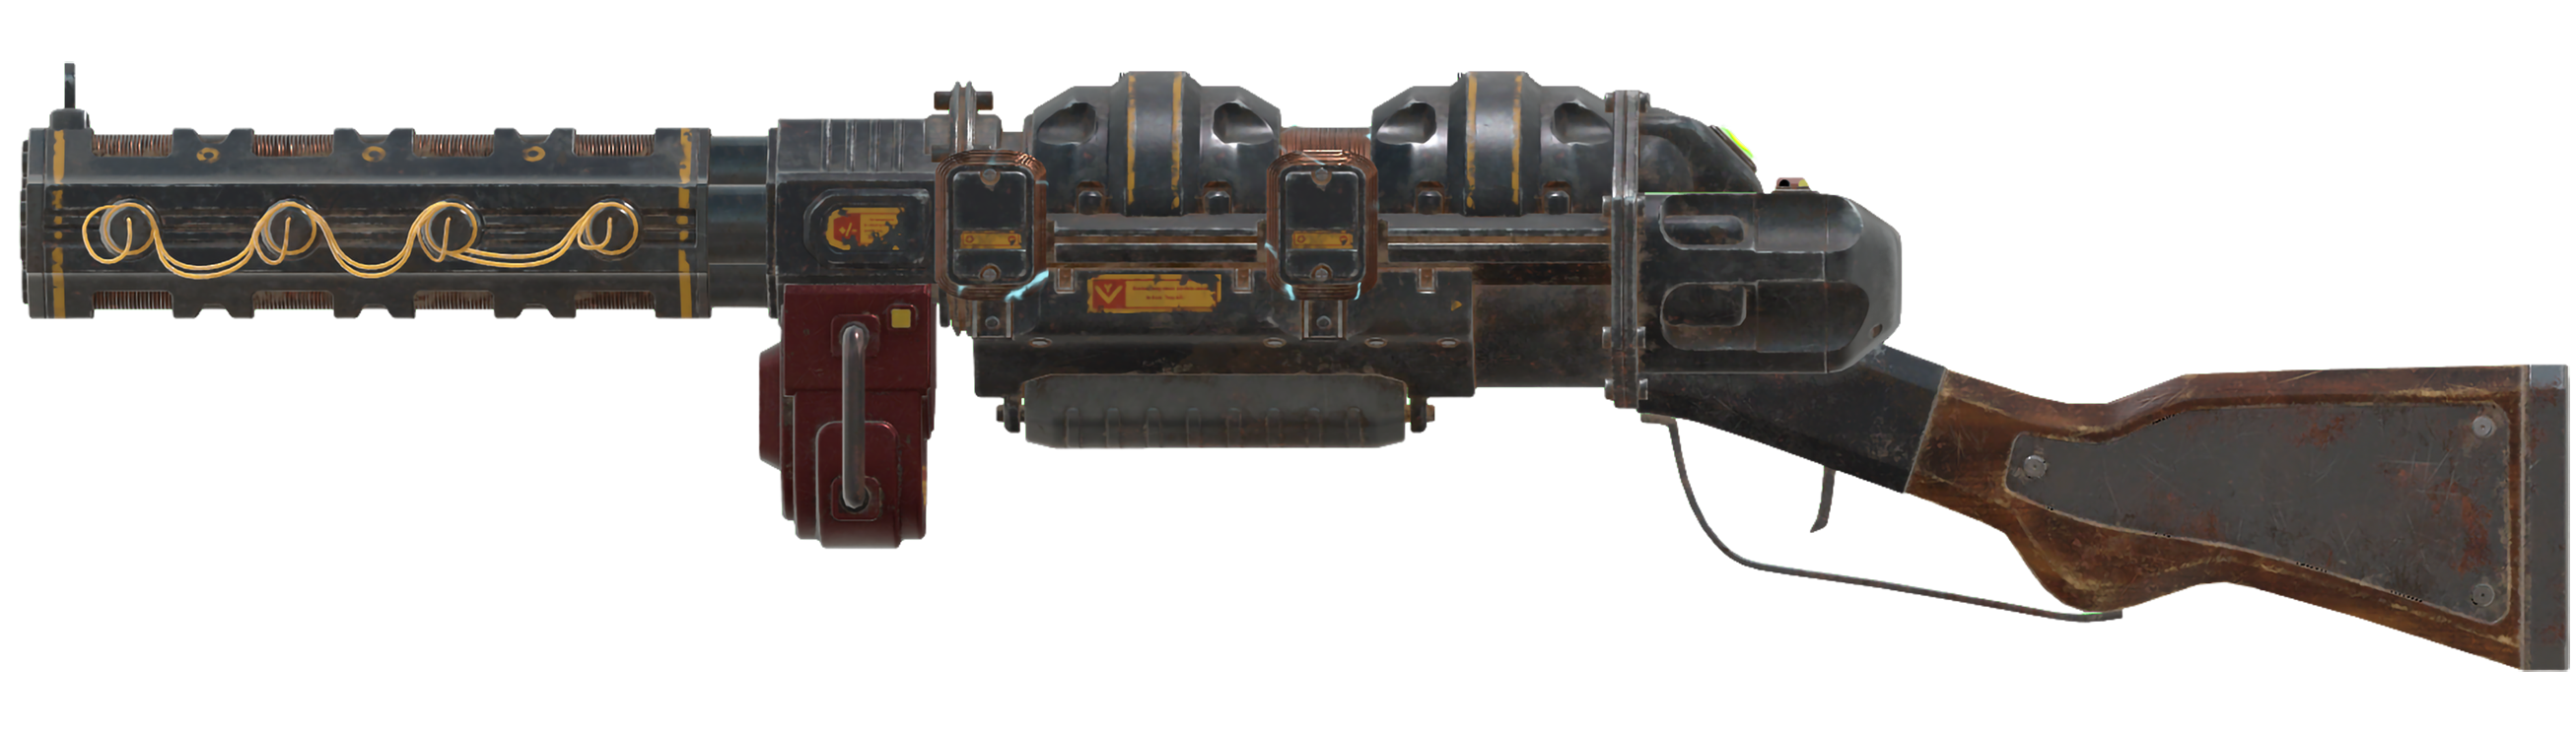 fallout 4 energy weapons mod